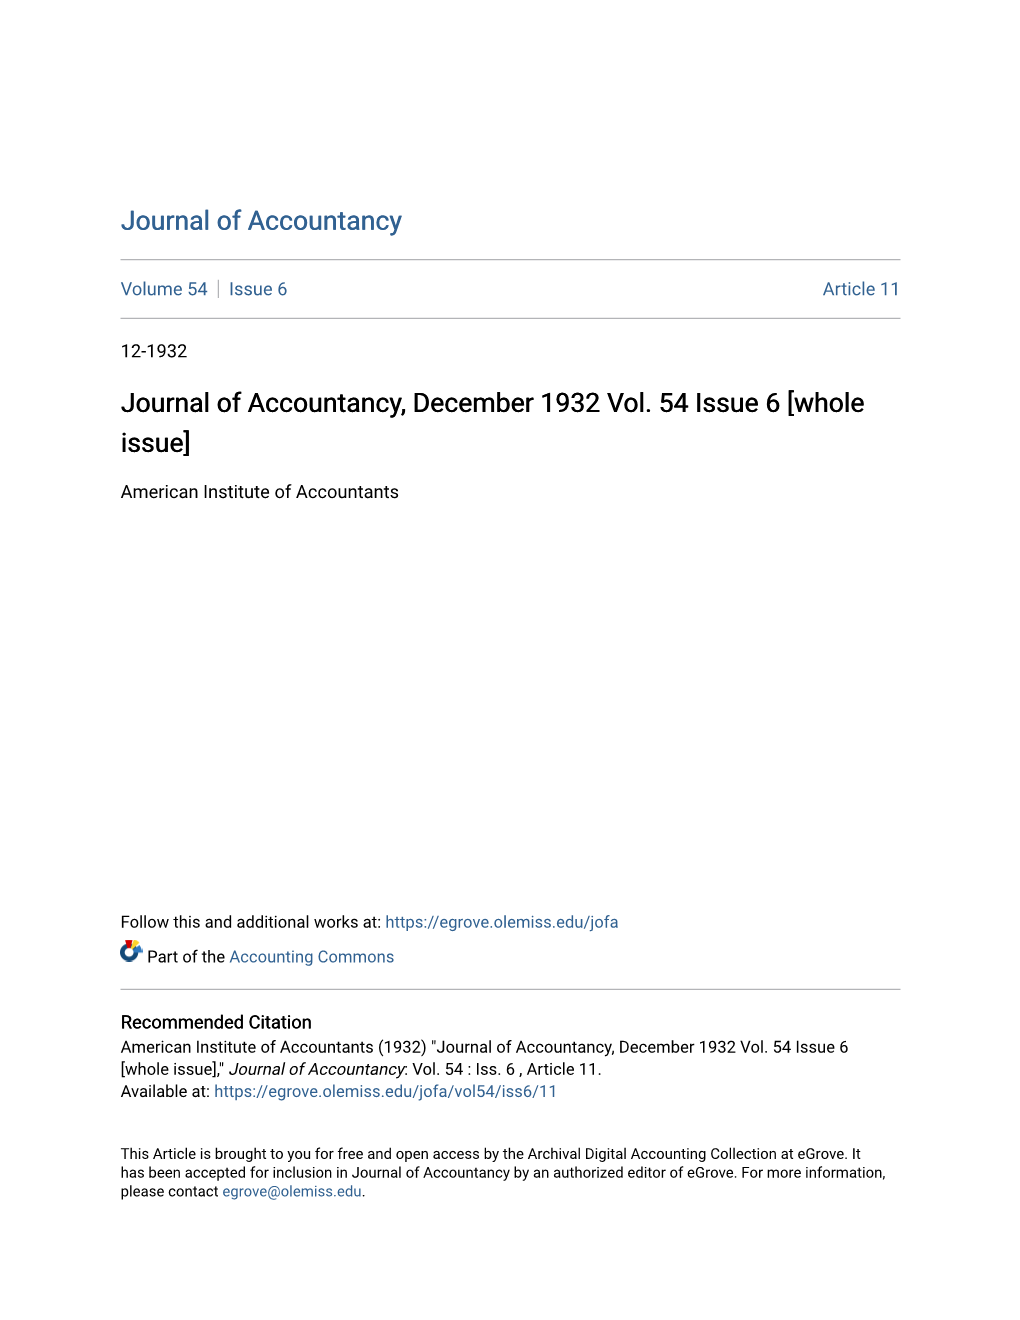 Journal of Accountancy, December 1932 Vol. 54 Issue 6 [Whole Issue]